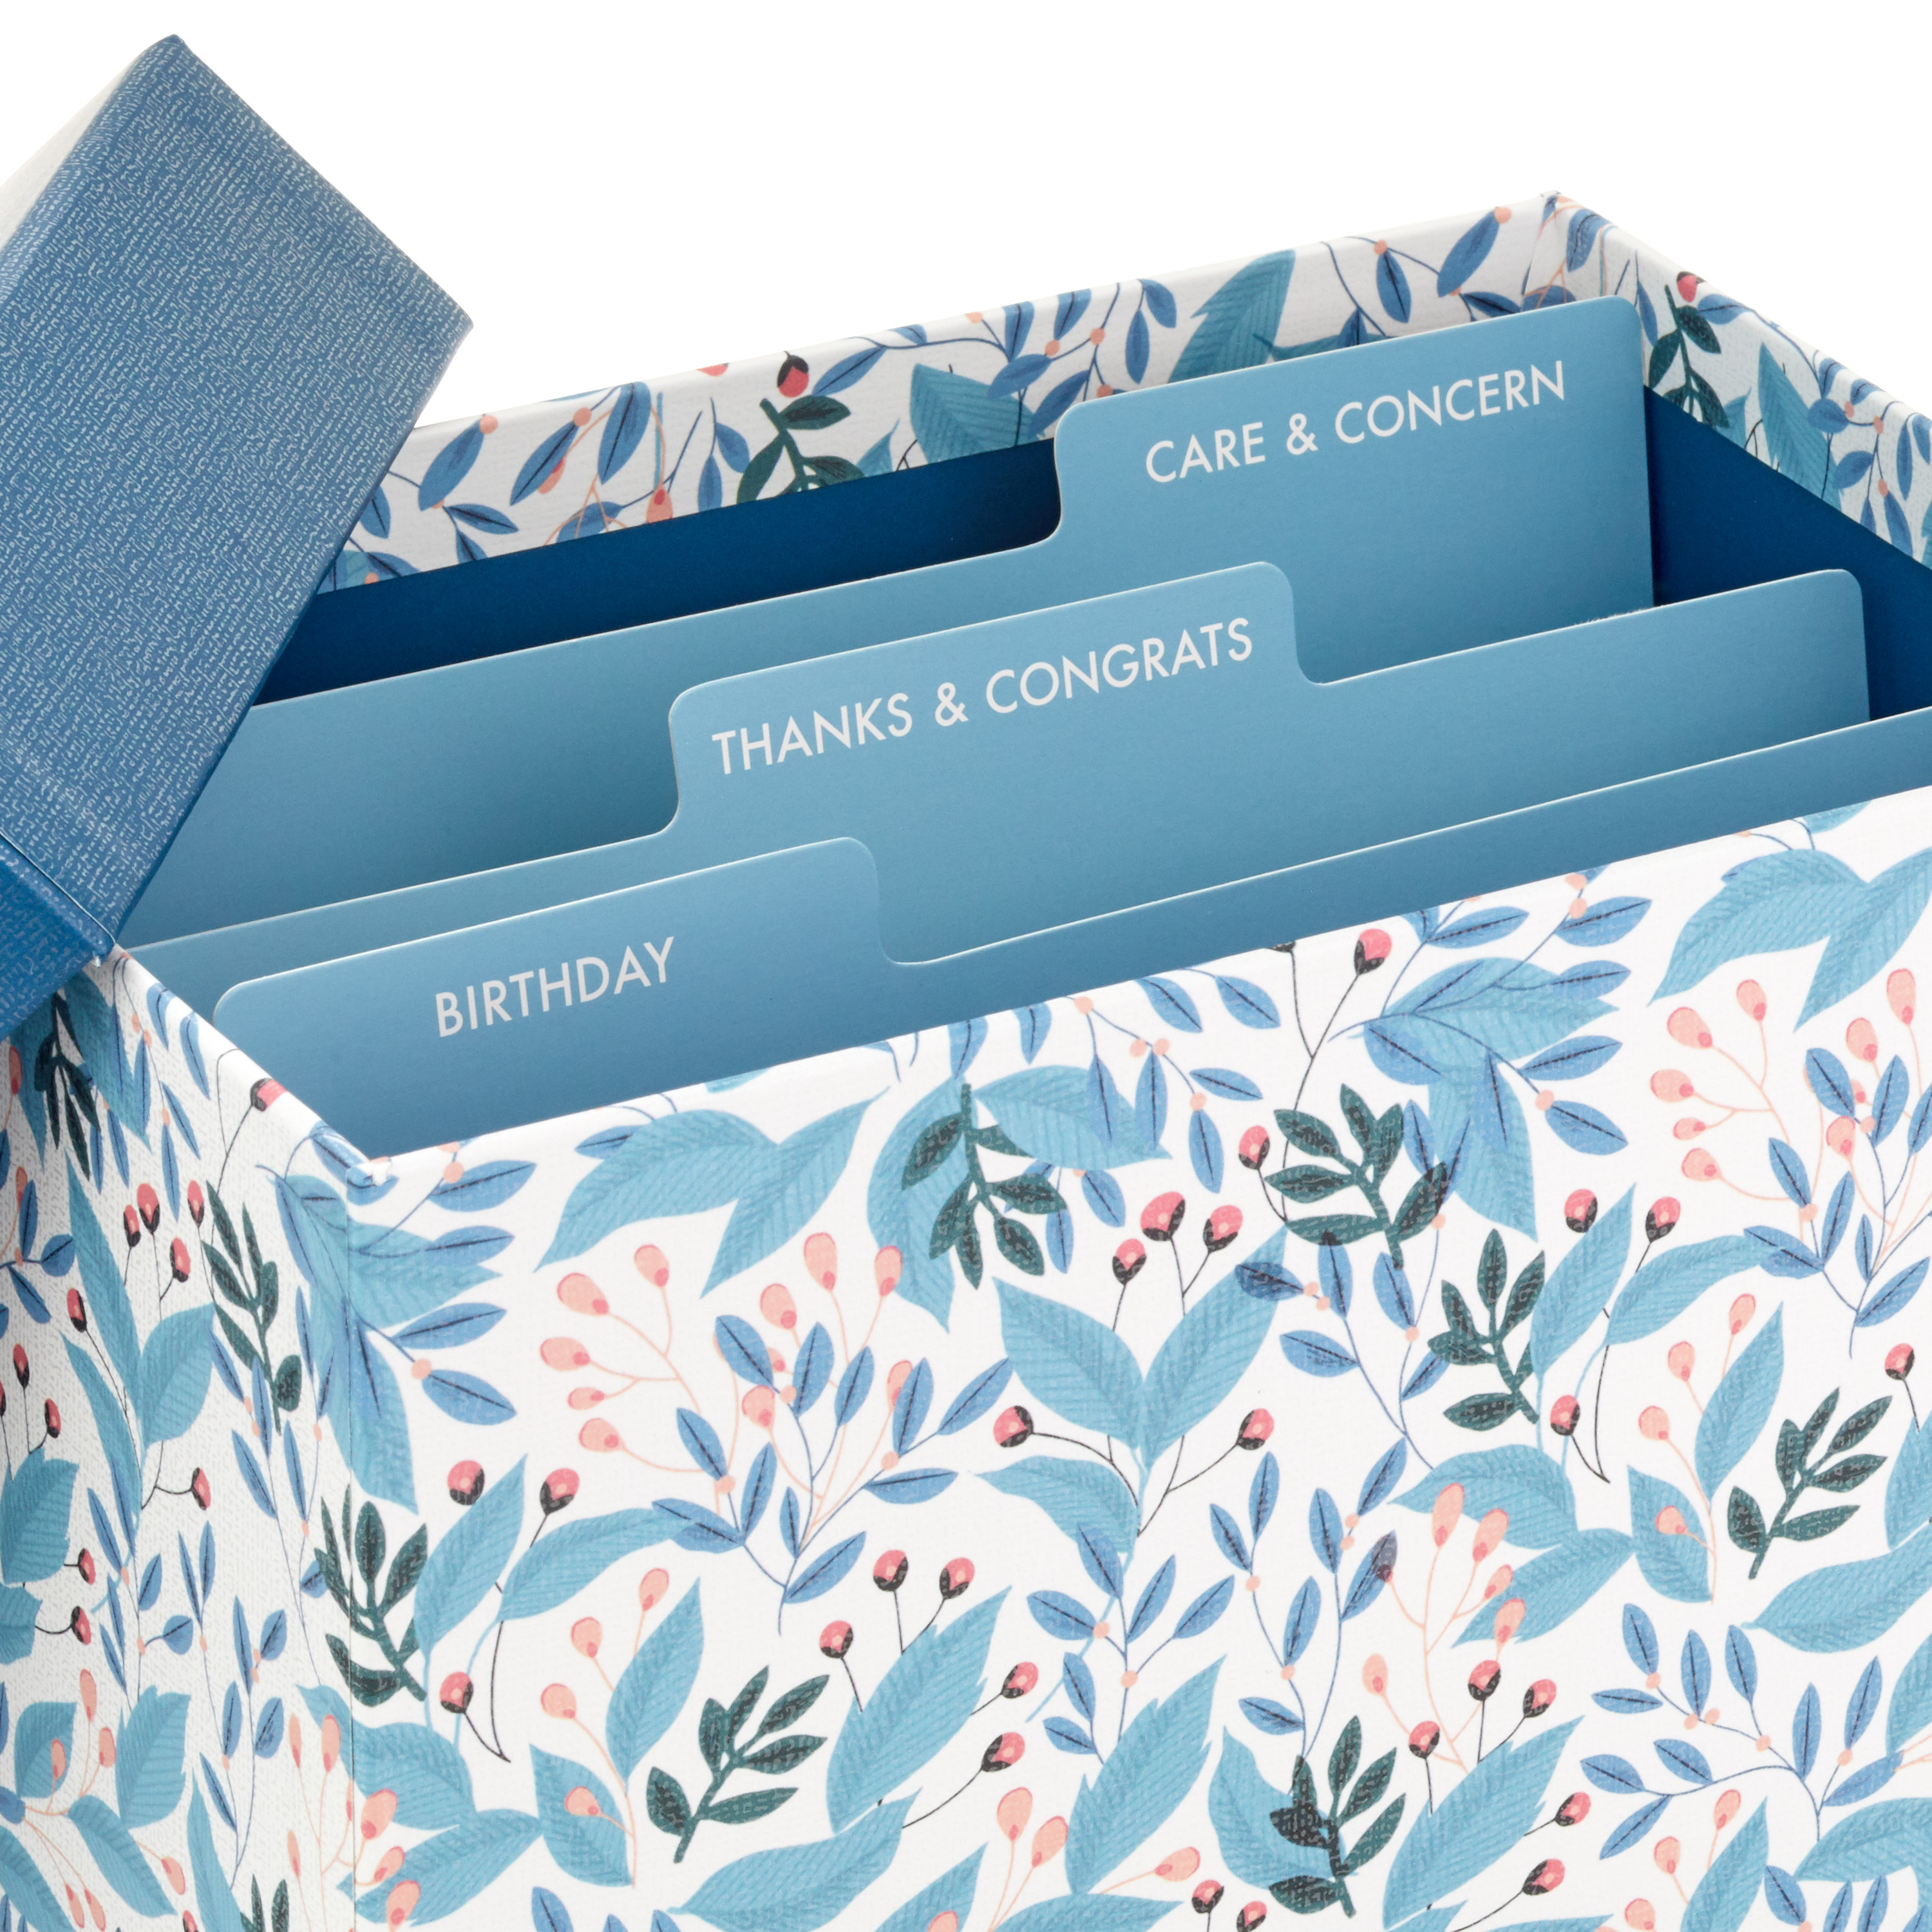 Hallmark All Occasion Greeting Cards Assortment—30 Cards and Envelopes with Card Organizer Box (Blue Leaves)—Birthday Cards, Baby Shower Cards, Sympathy Cards, Wedding Cards, Thank You Cards - image 5 of 5